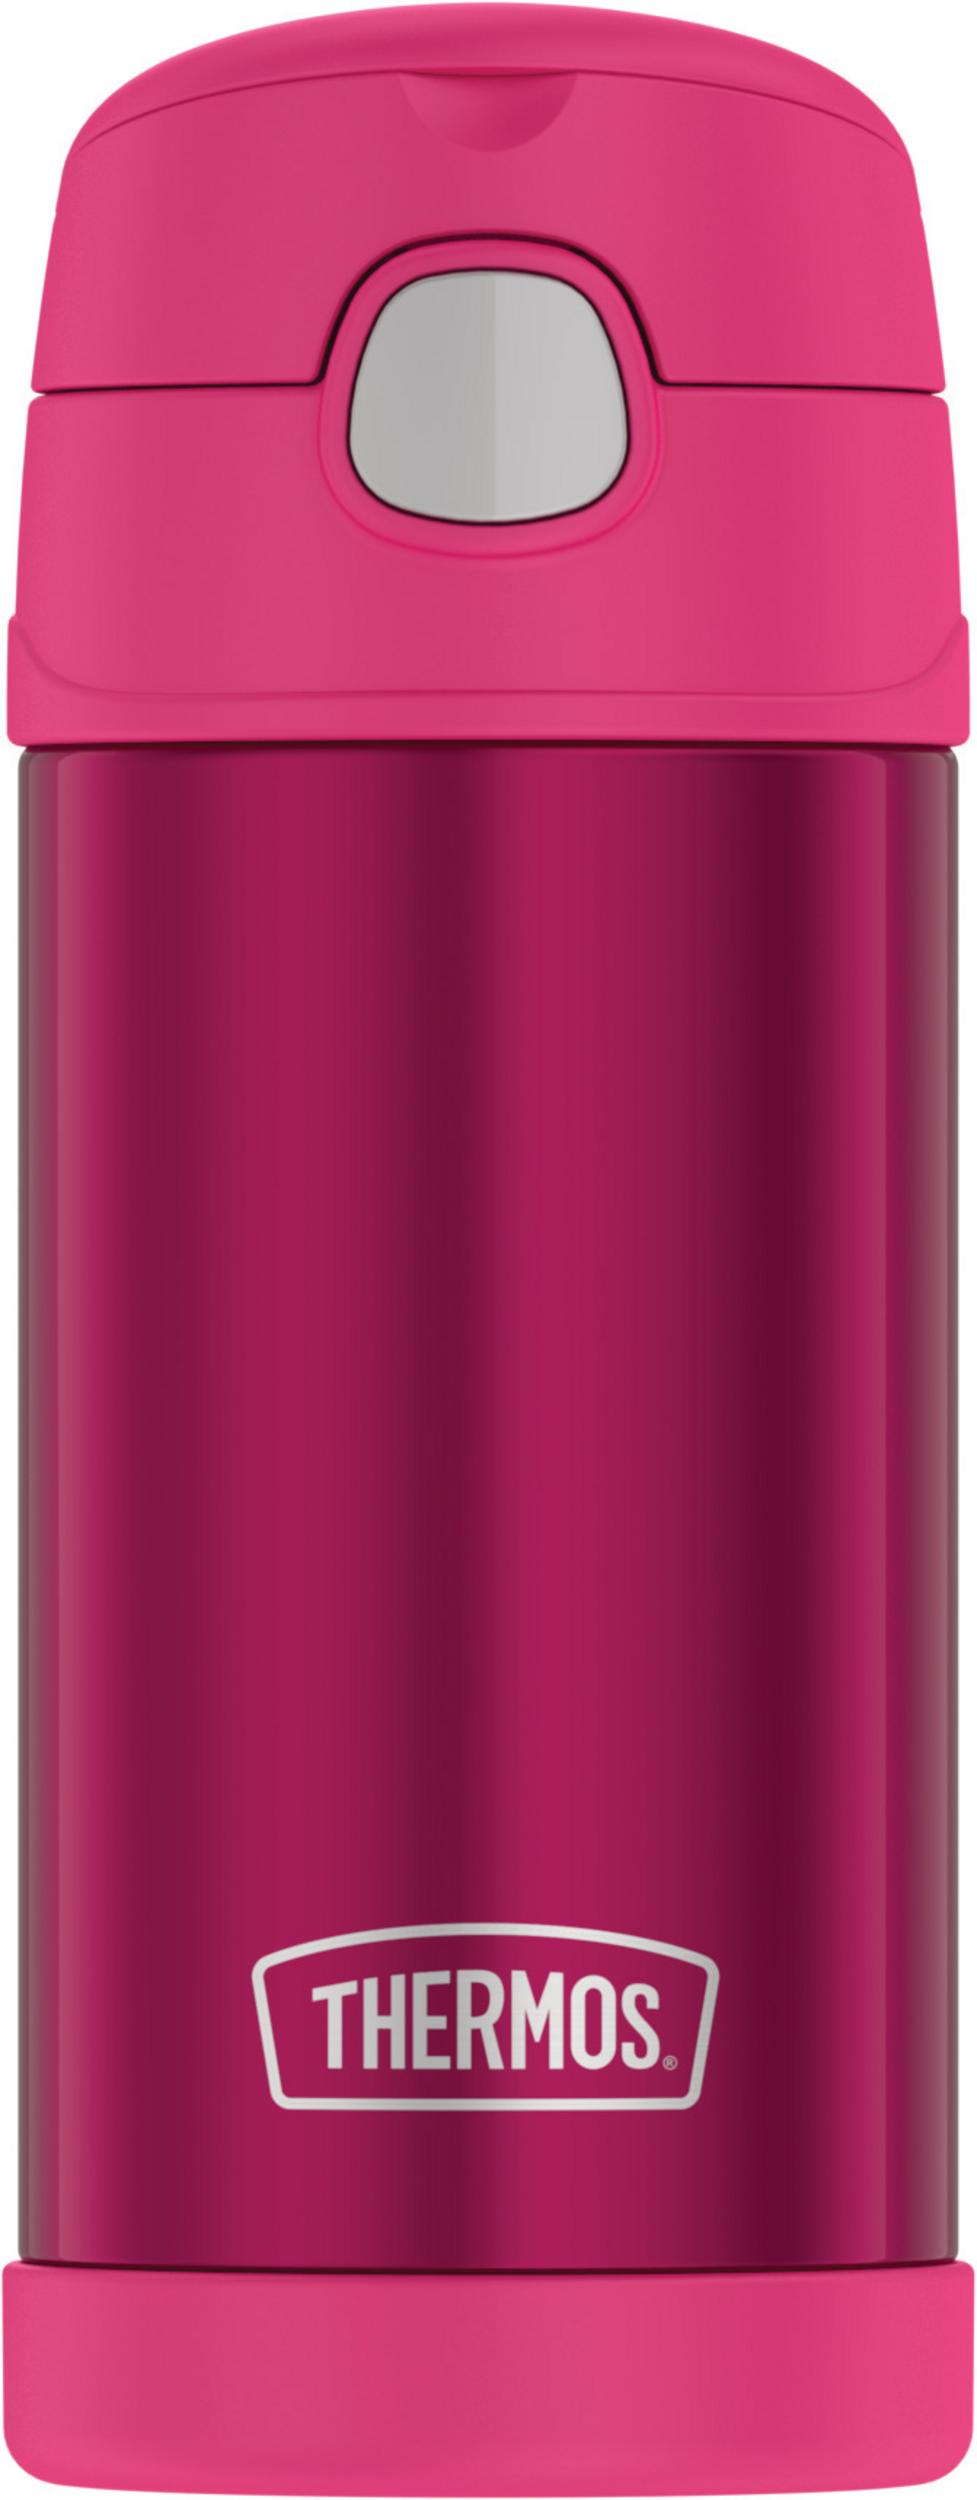 Bouteille Thermos FUNtainer, Rose, 355ml    - Thermos - Bouteille d'eau - 